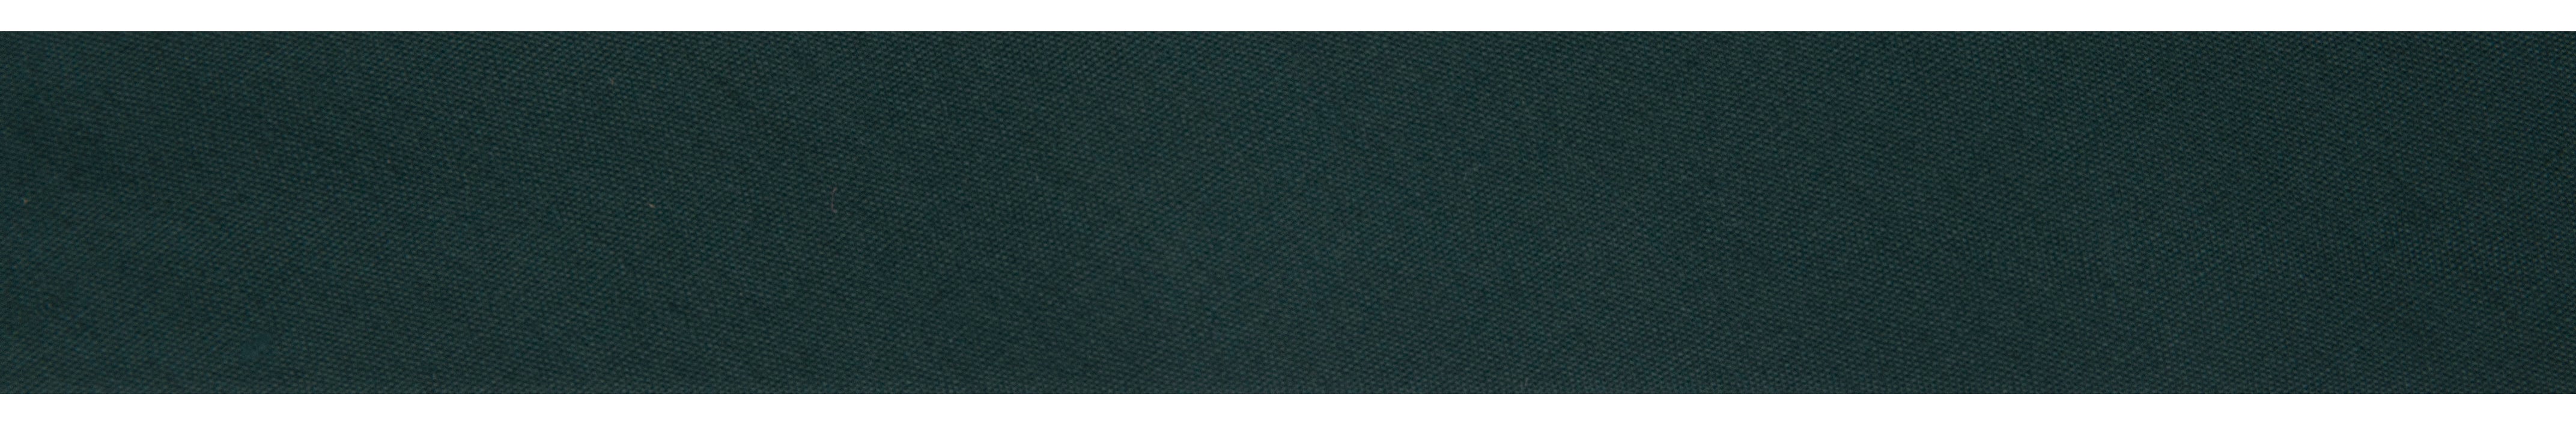 20m roll of Dark Green Bias Binding | 25mm width from Jaycotts Sewing Supplies